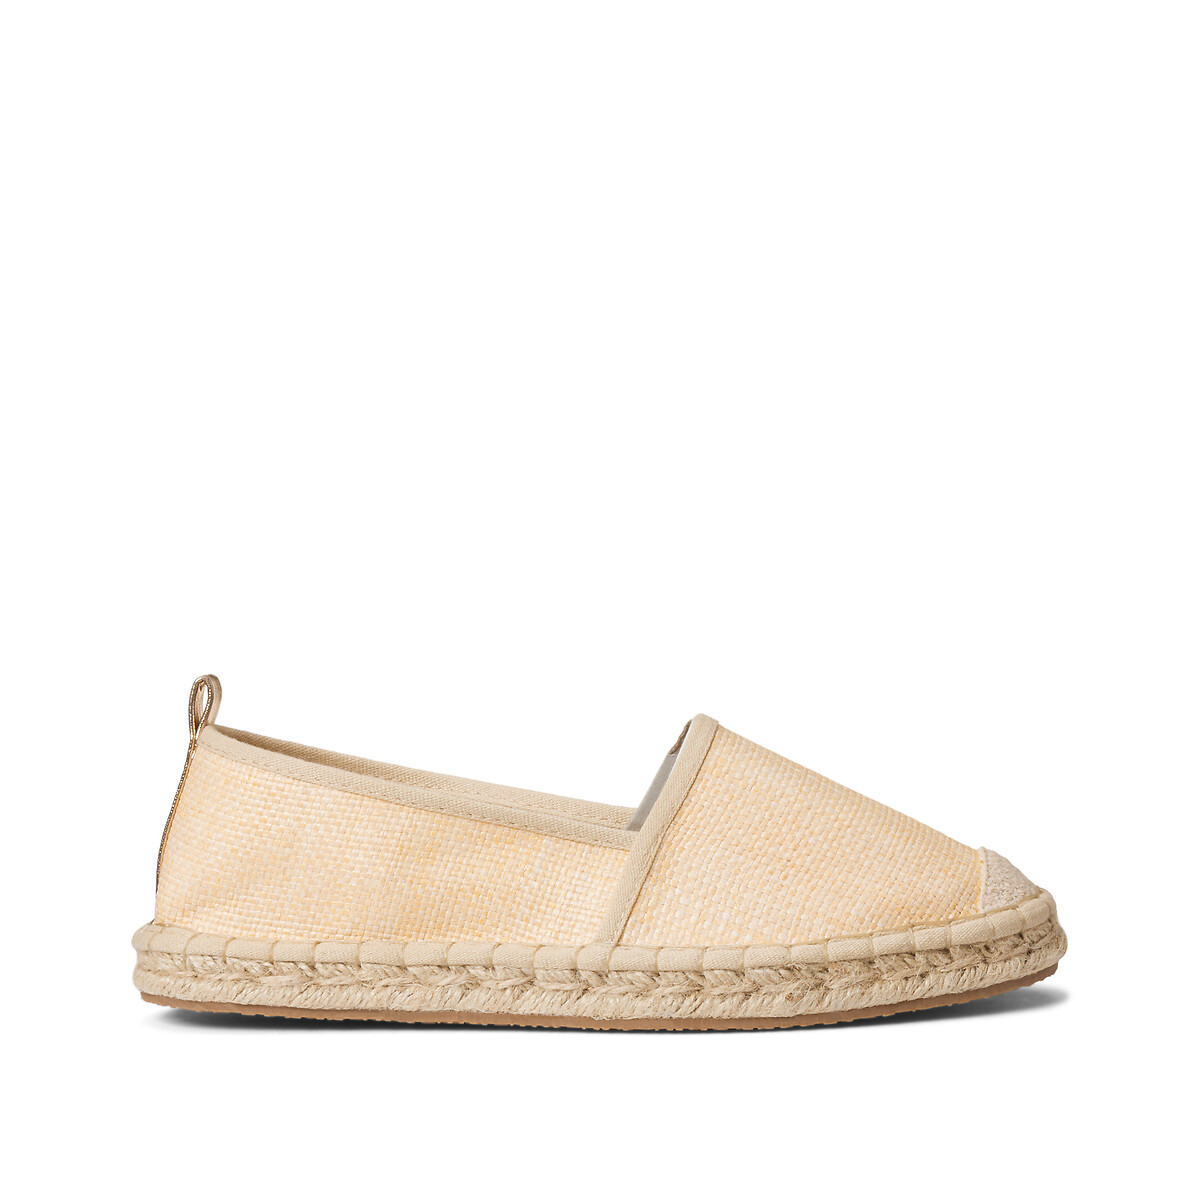 ONLY SHOES Espadrilles Koppa